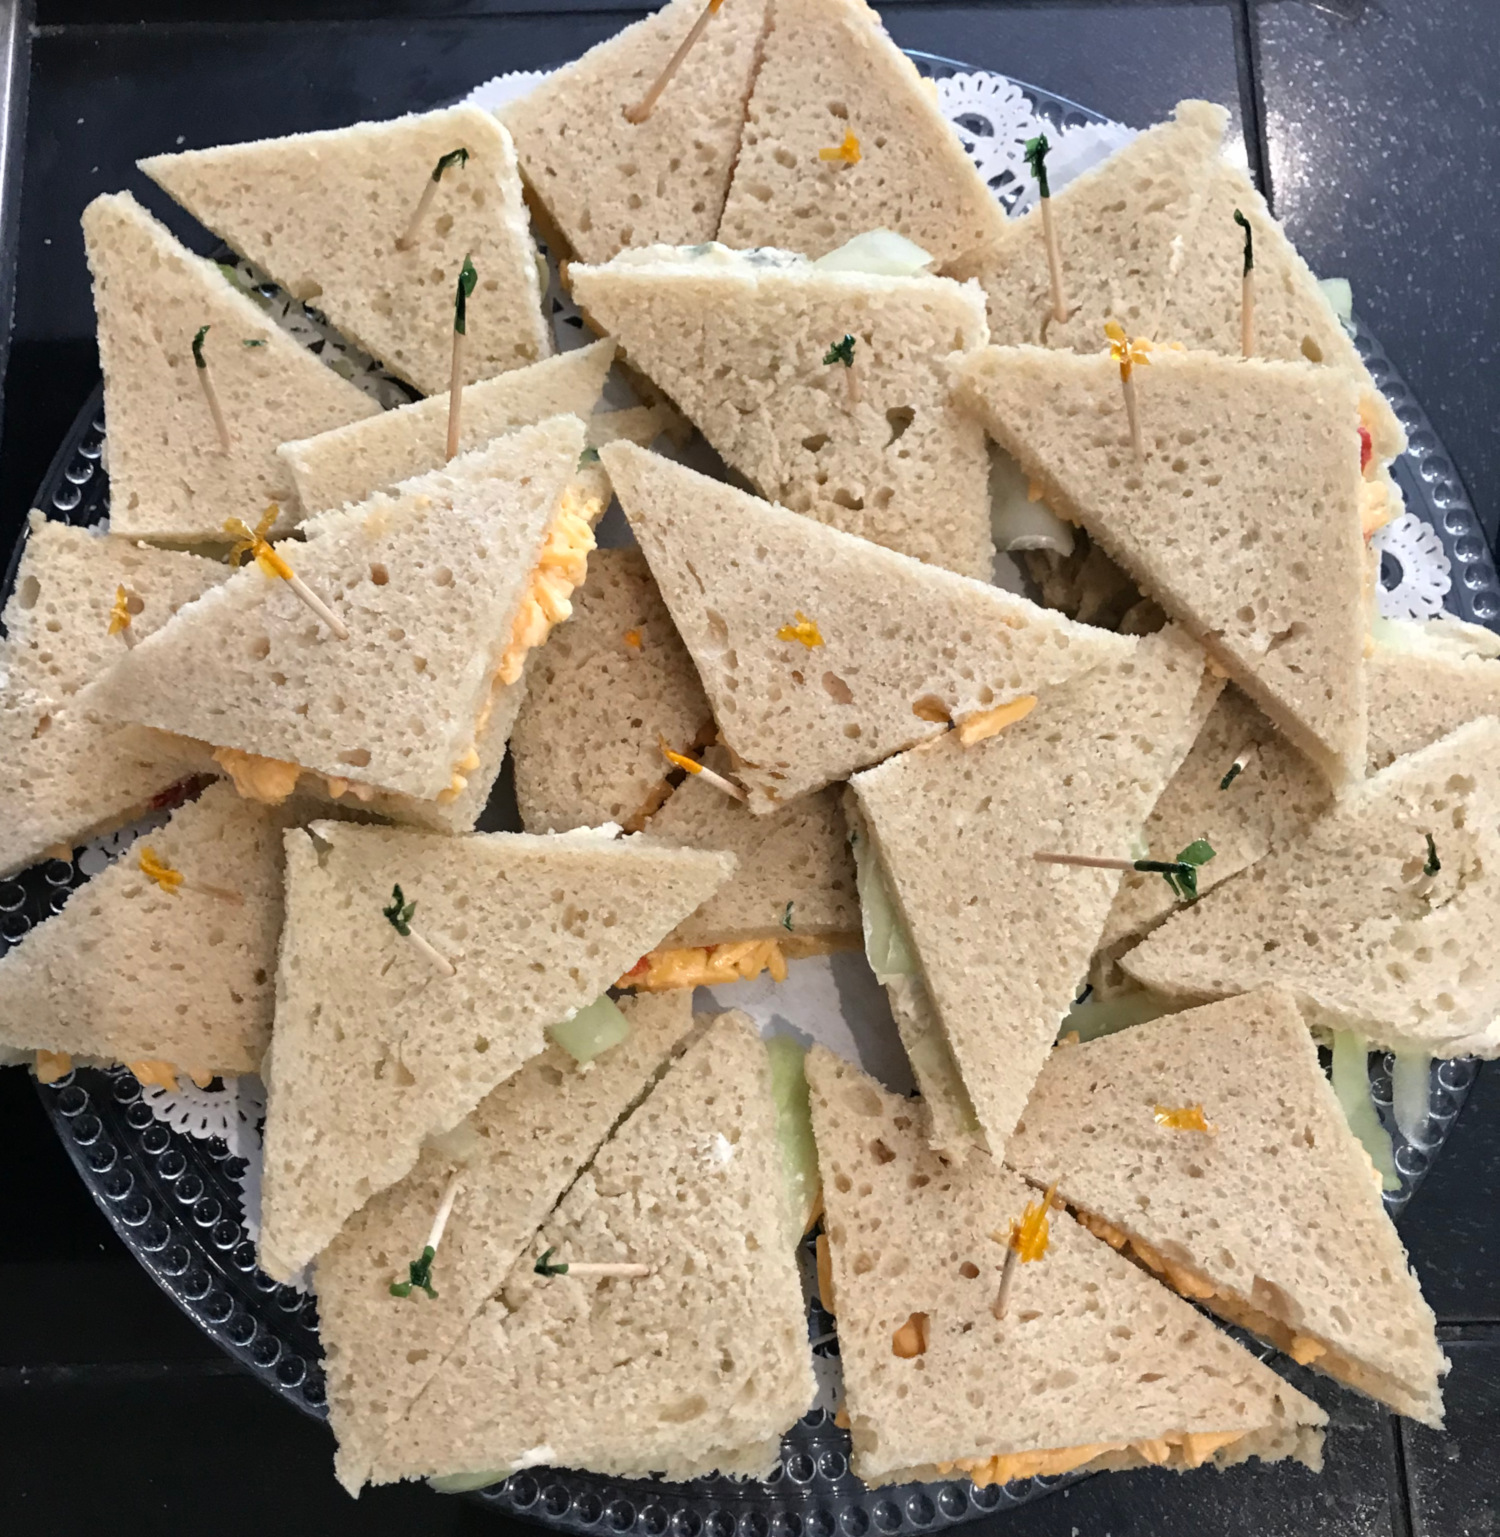 Cucumber and Pimento Cheese Sandwiches on a Platter